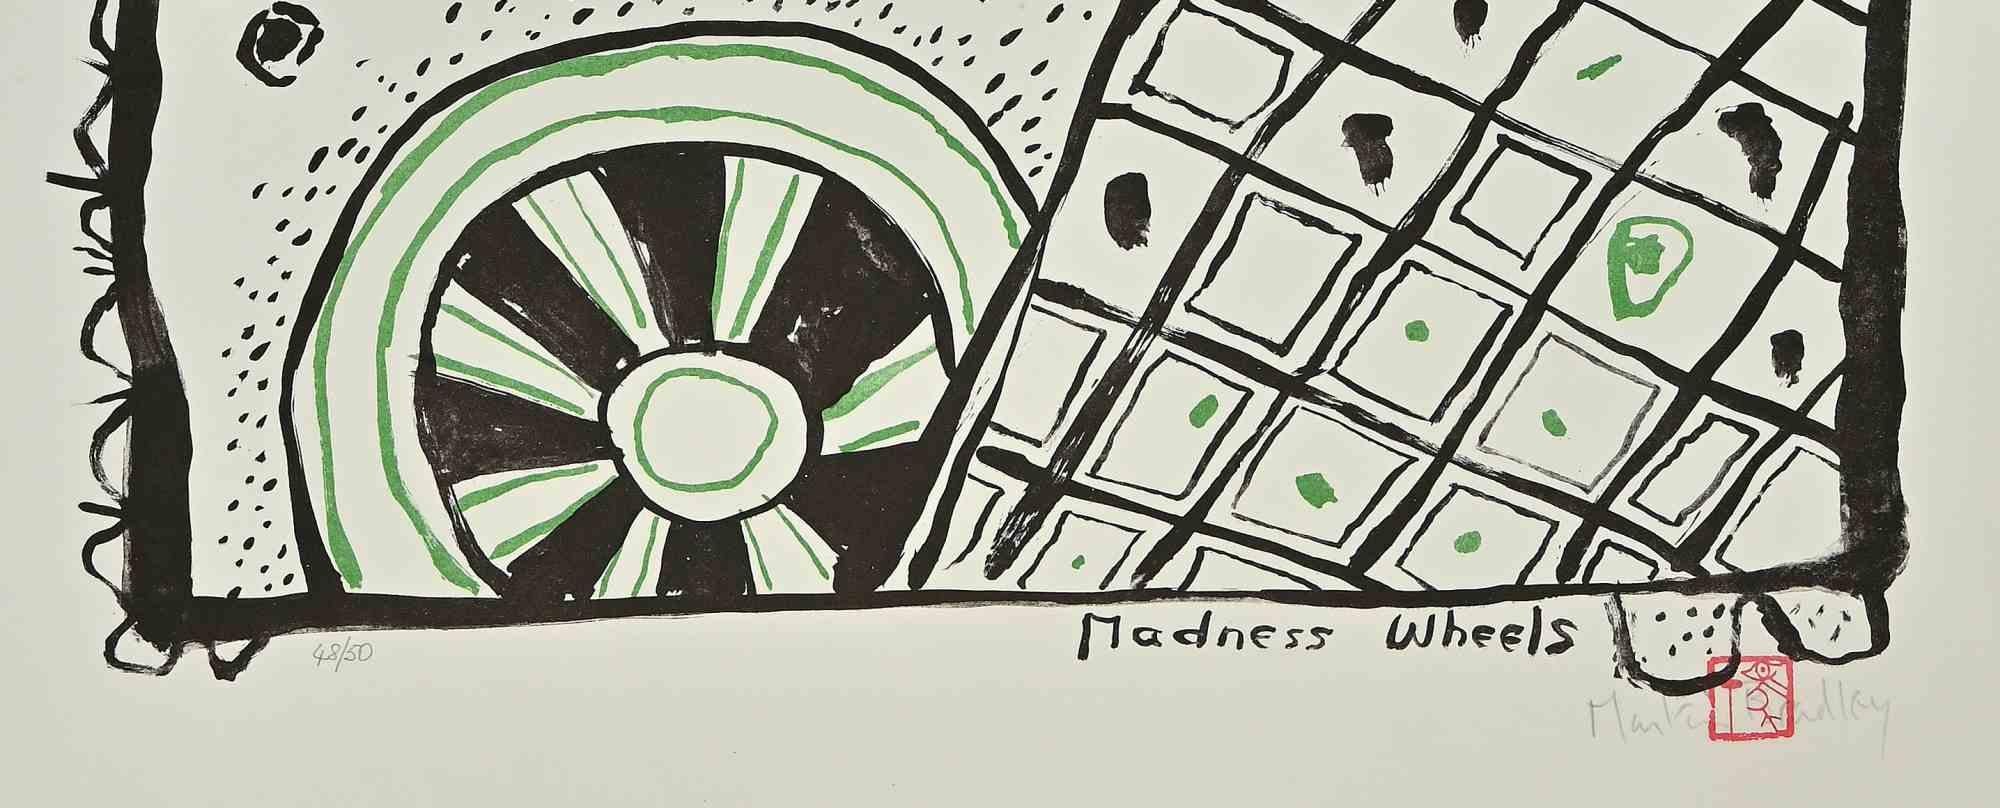 Madness Wheels - Lithograph by Martin Bradley - 1970s For Sale 1